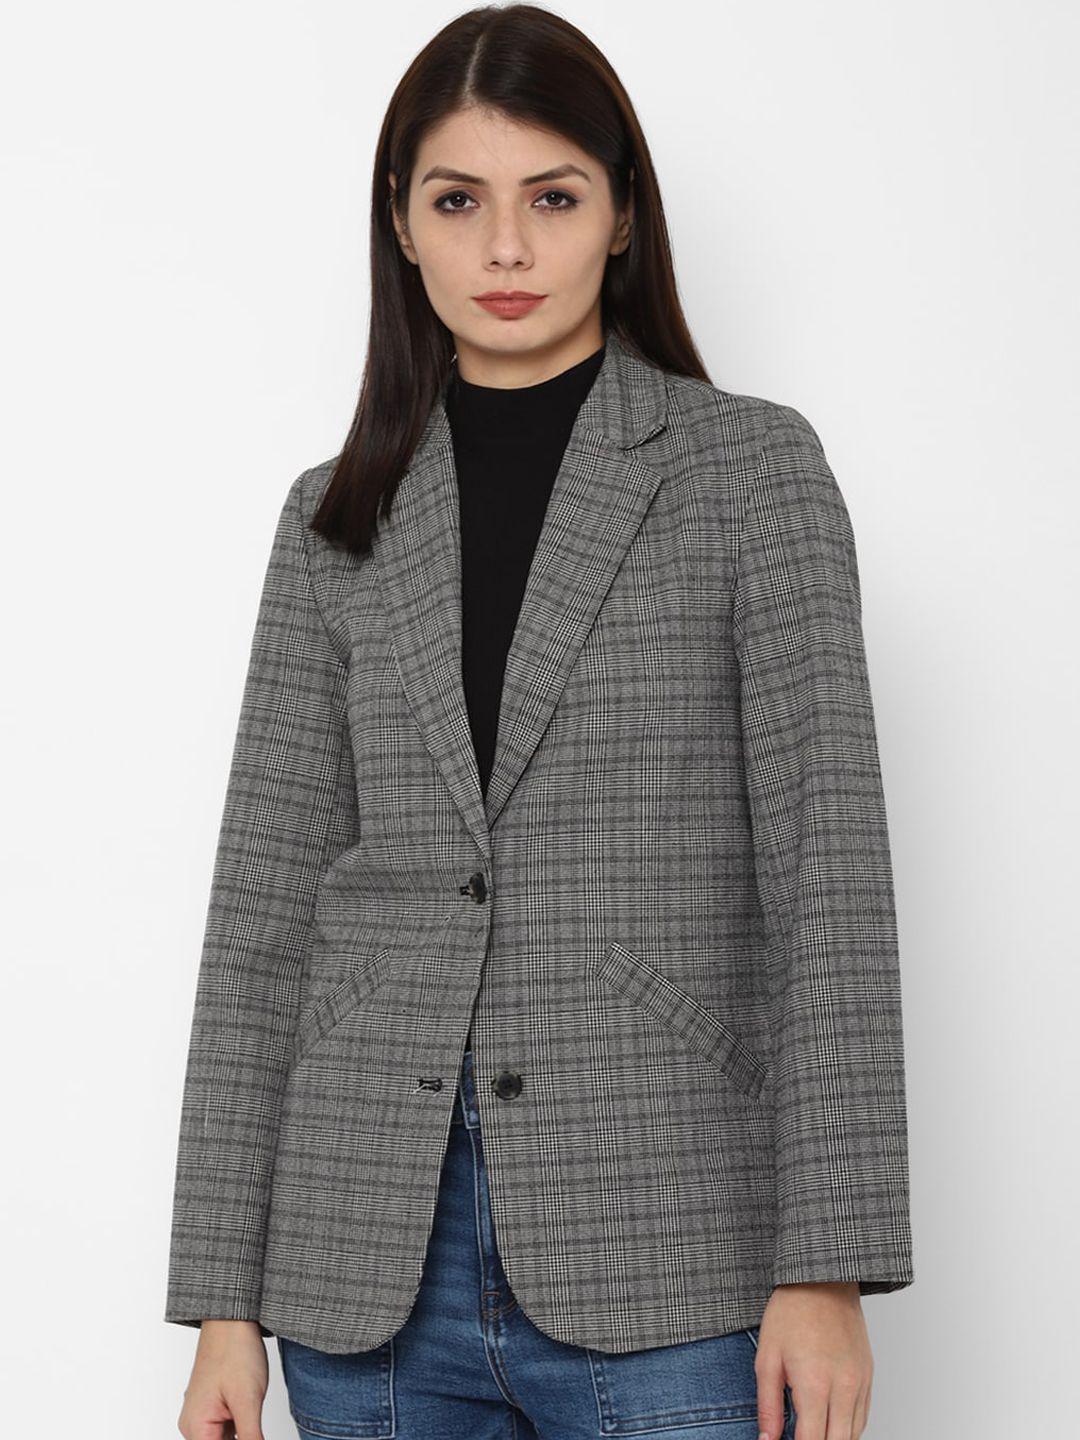 american eagle outfitters women grey & black checked tailored jacket